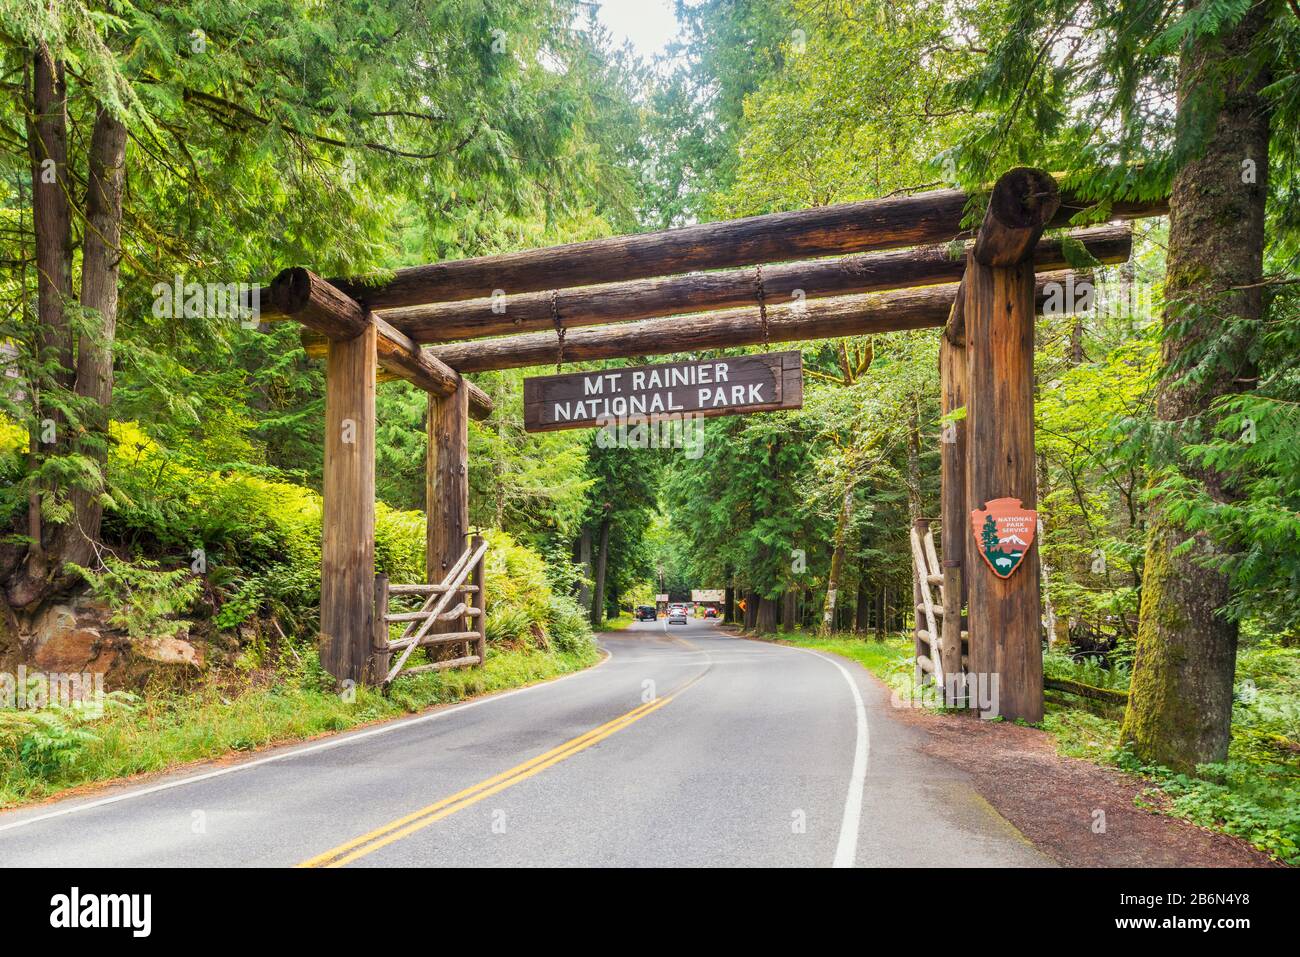 Entrance Sign to Mount Rainier National Park, Washington, USA. The park was established in 1899 as the fifth national park in the United States. Stock Photo